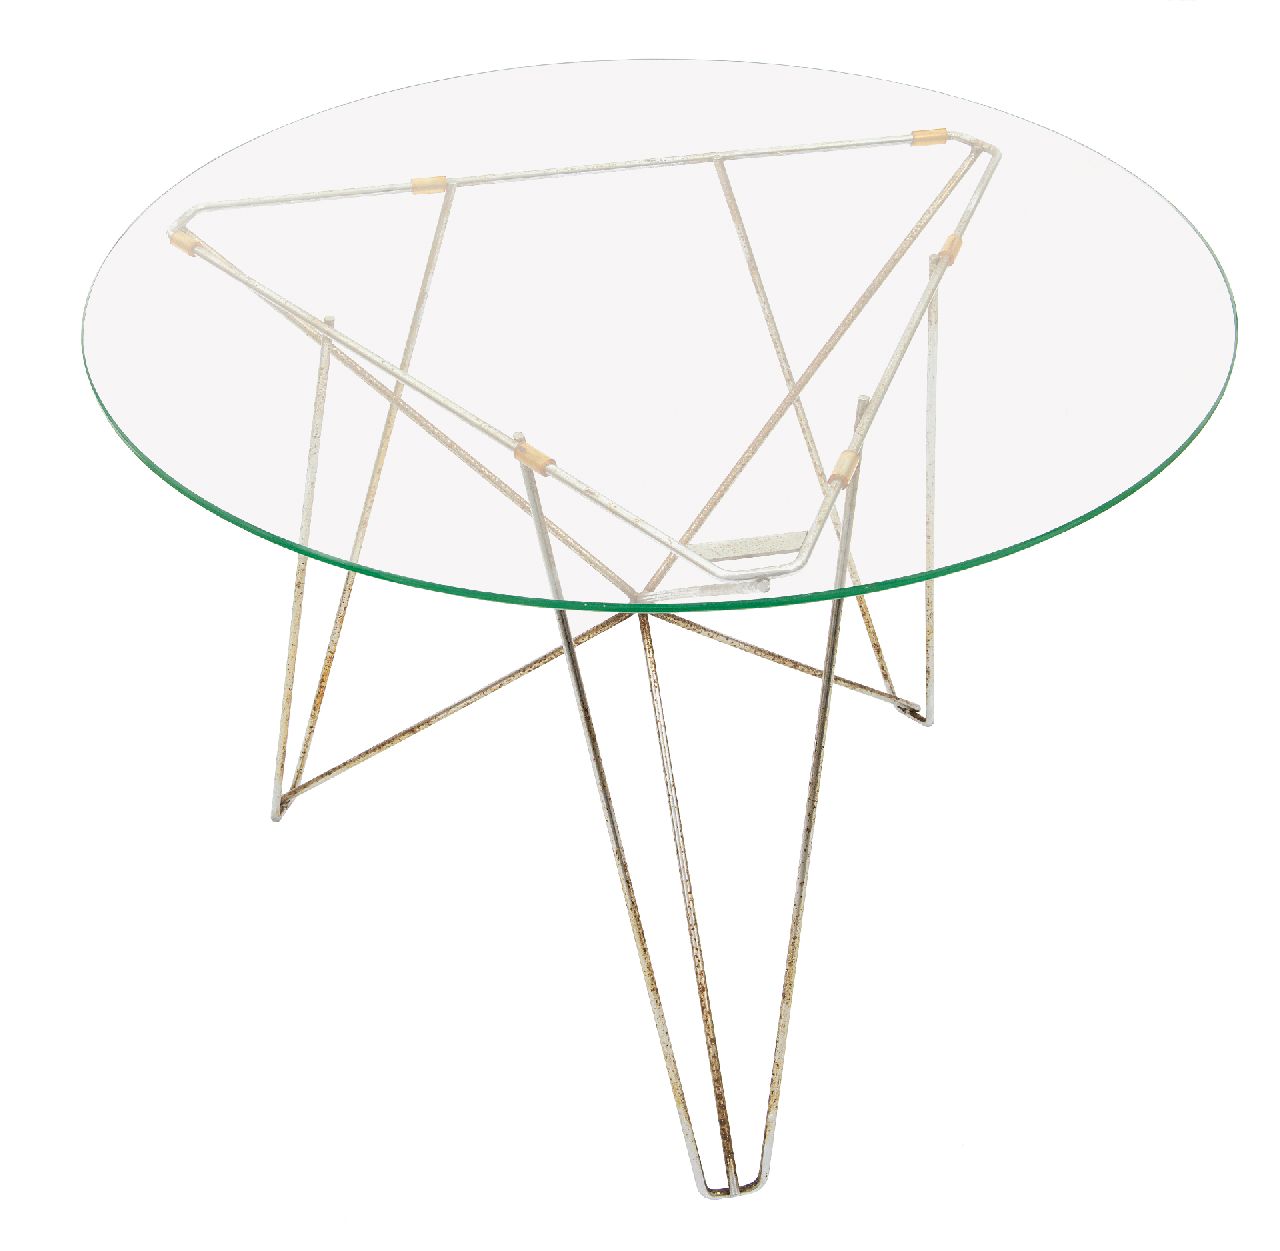 Constant (Constant Anton Nieuwenhuijs)   | Constant (Constant Anton Nieuwenhuijs) |  offered for sale | IJhorst table, metal and glass 46.4 x 65.0 cm, signed on the frame and dated 1953